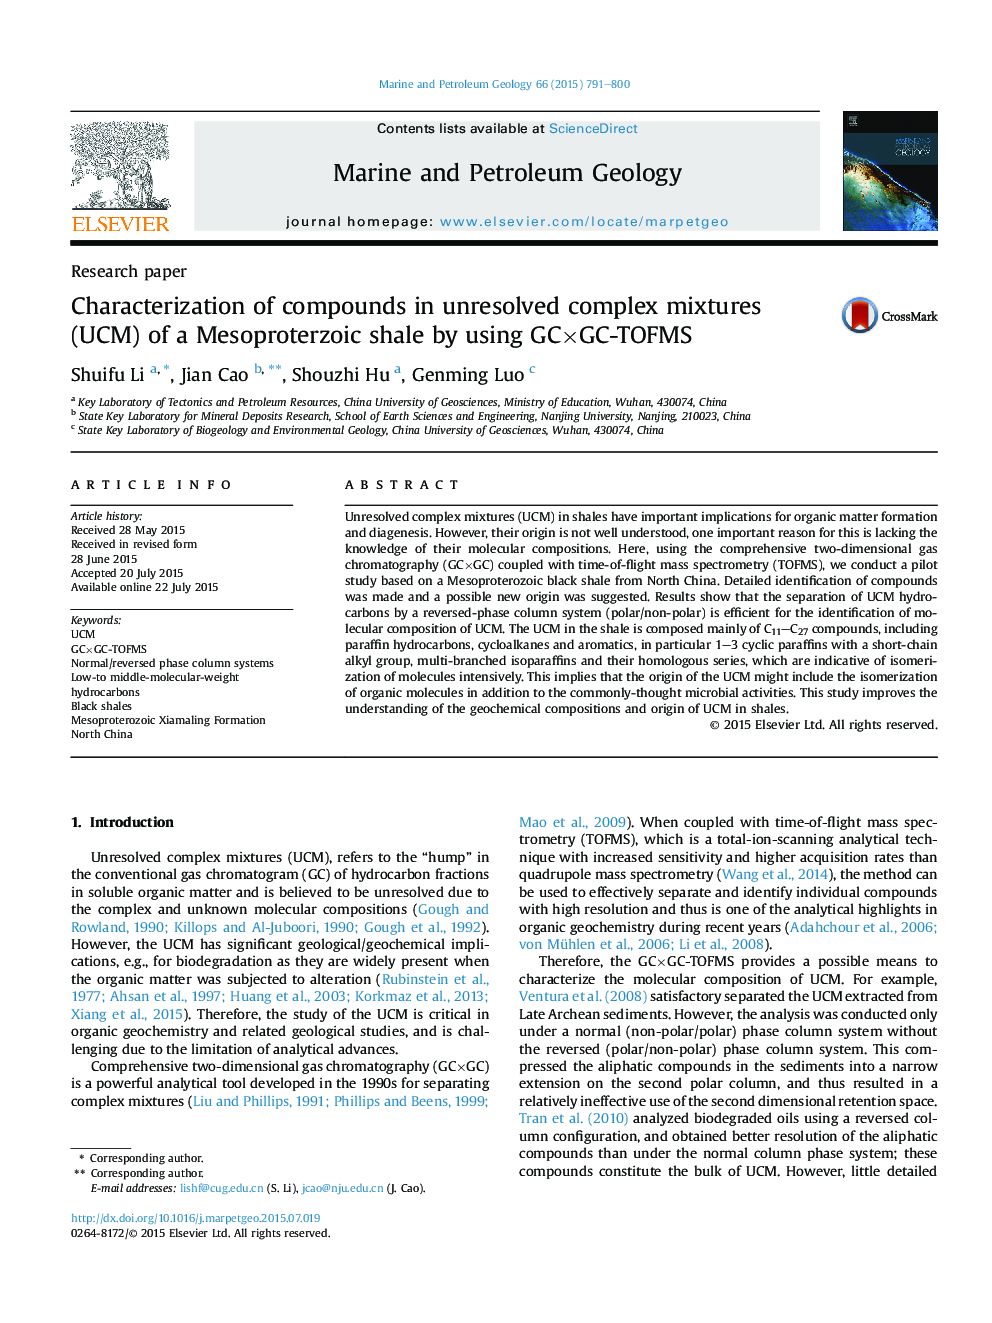 Characterization of compounds in unresolved complex mixtures (UCM) of a Mesoproterzoic shale by using GC×GC-TOFMS